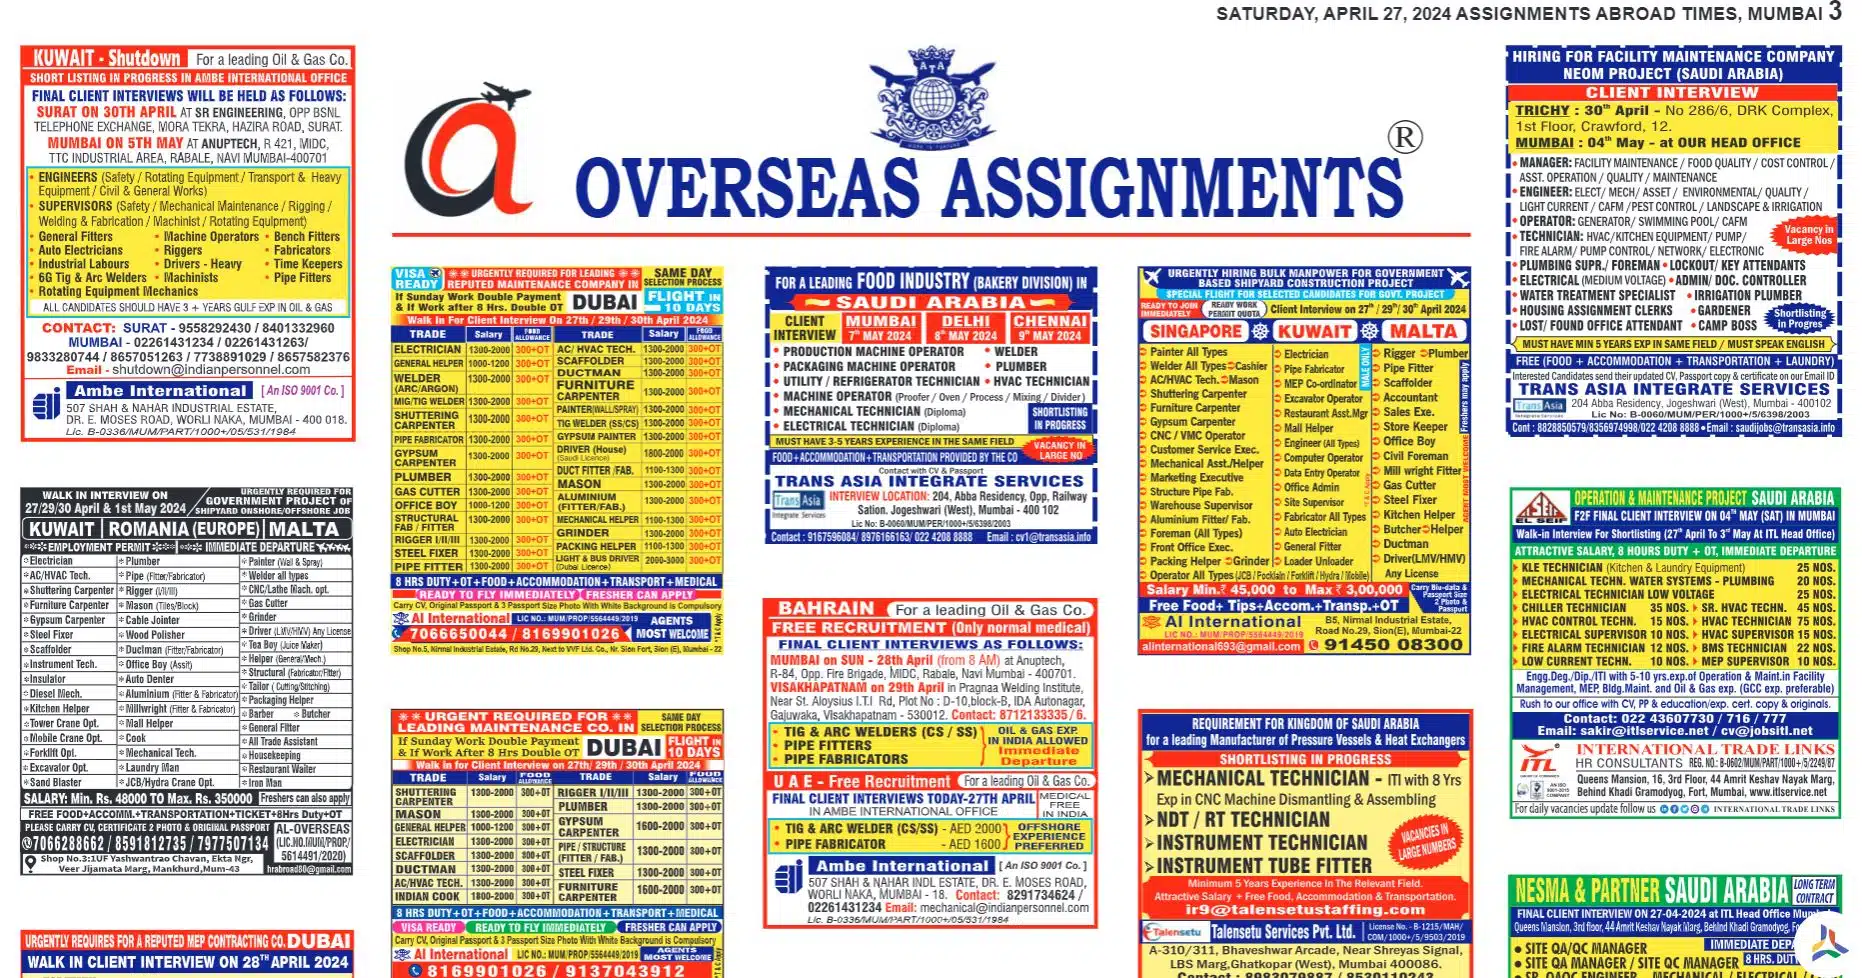 assignment times abroad